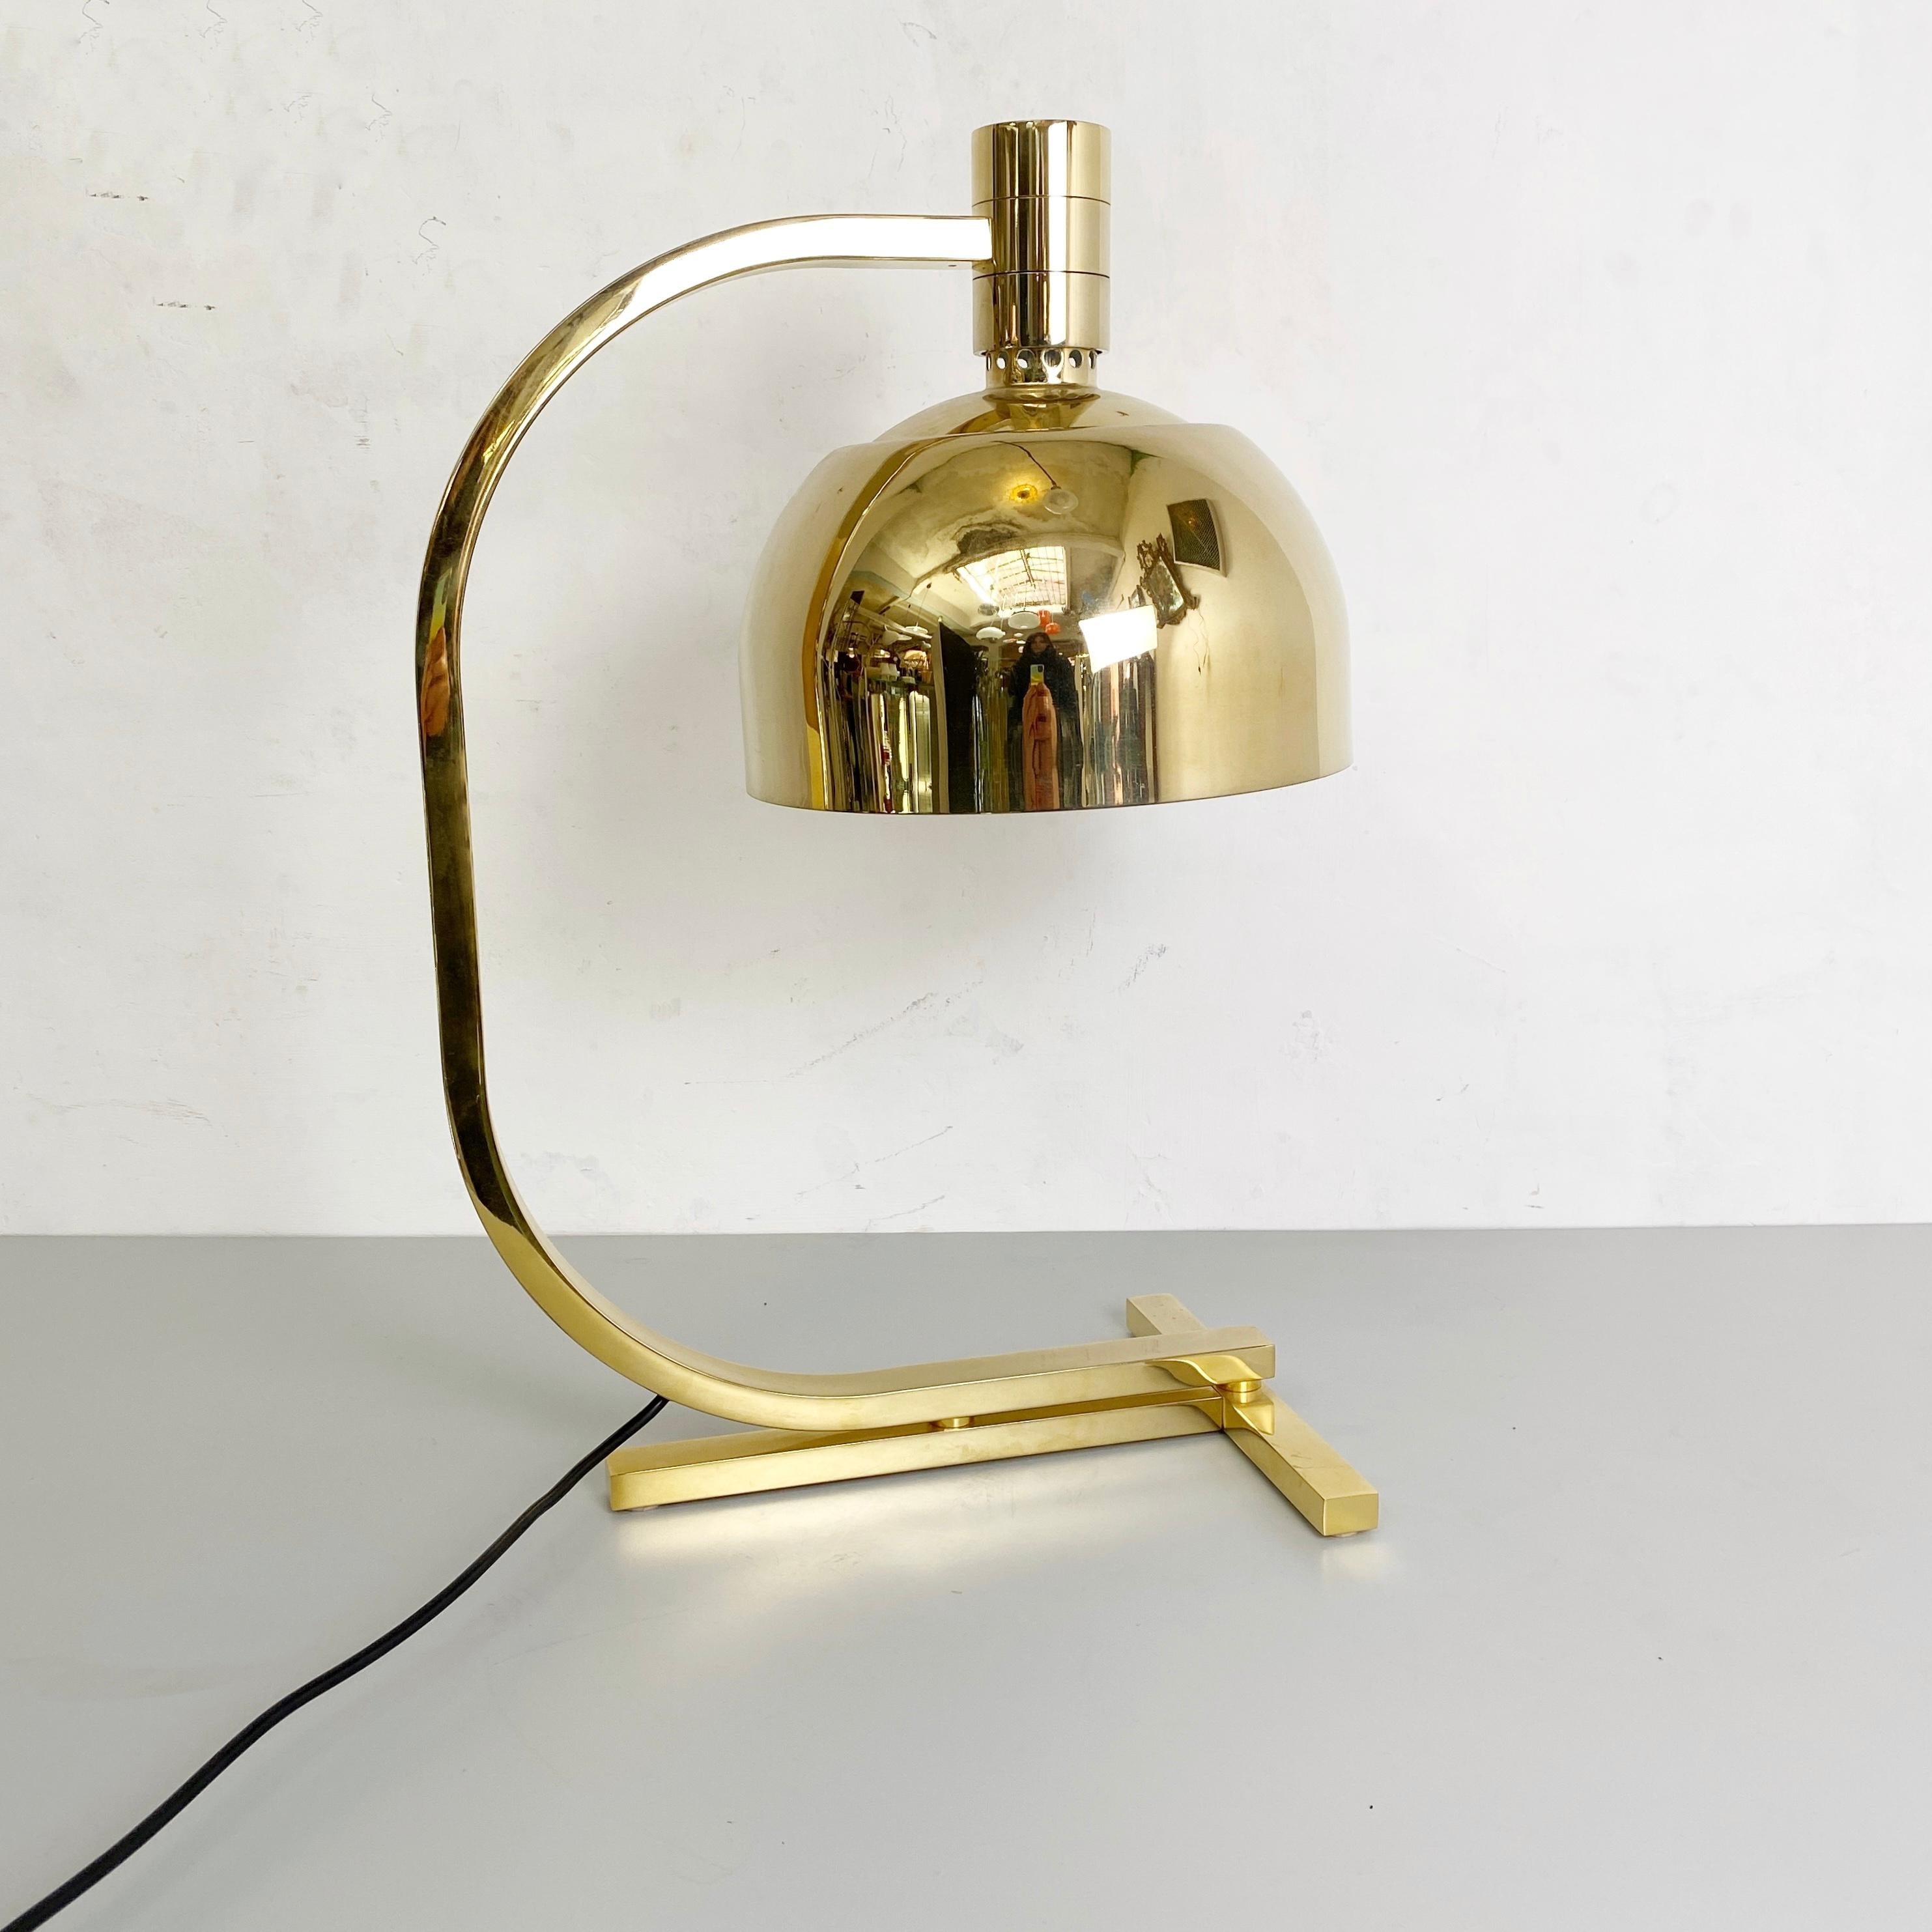 AM \ AS Gold Chrome Table Lamp by Franco Albini and Franca Helg for Sirrah, 1969 For Sale 3